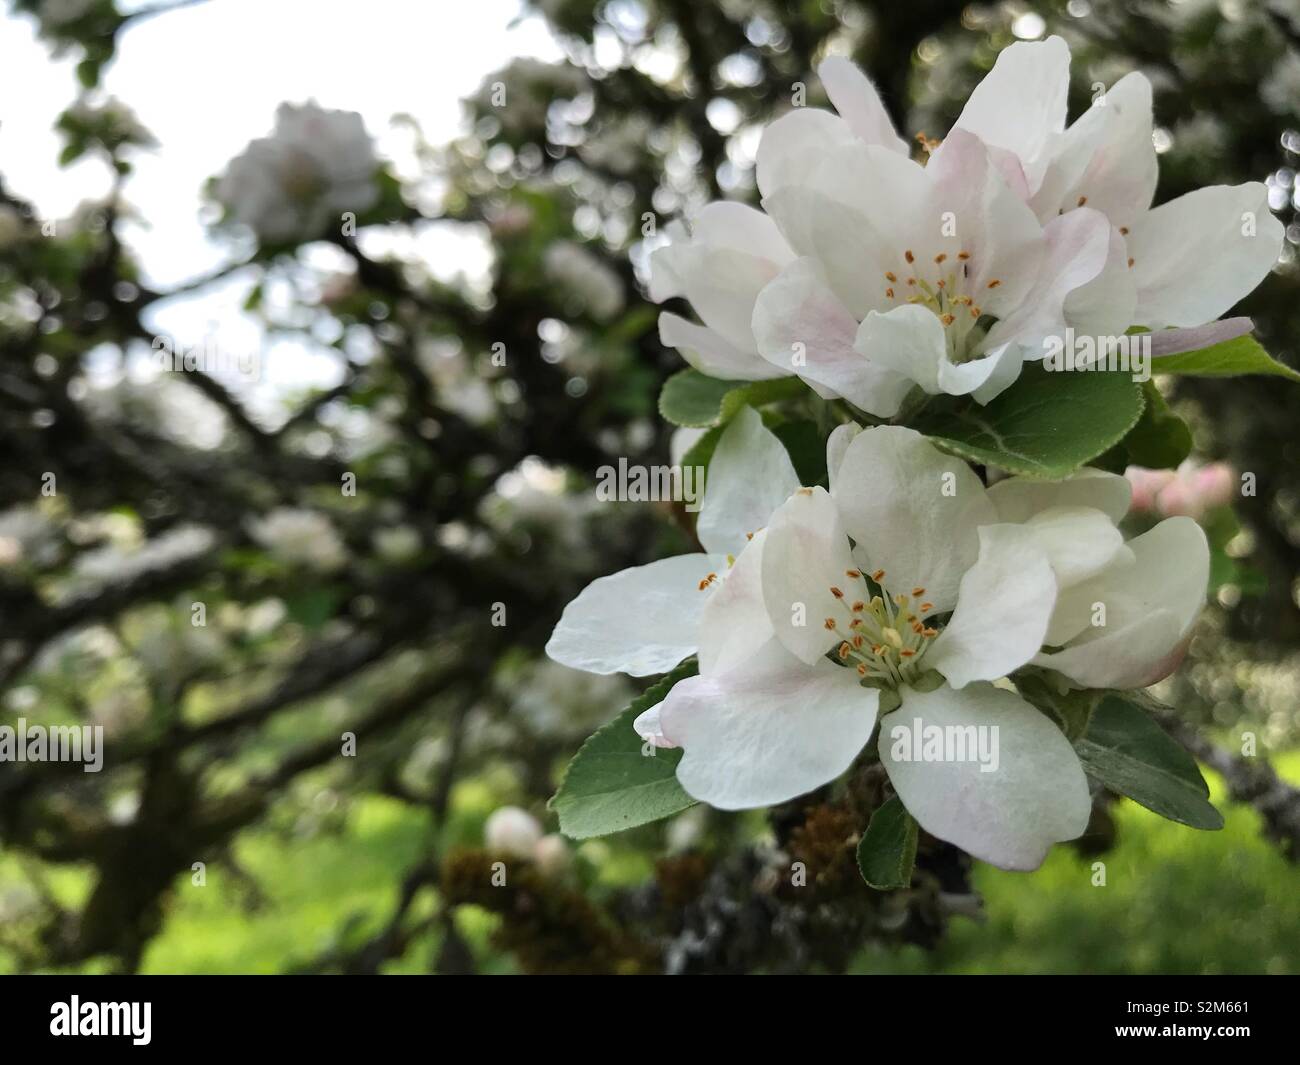 Close up of white flower, with faded branches in background. Stock Photo